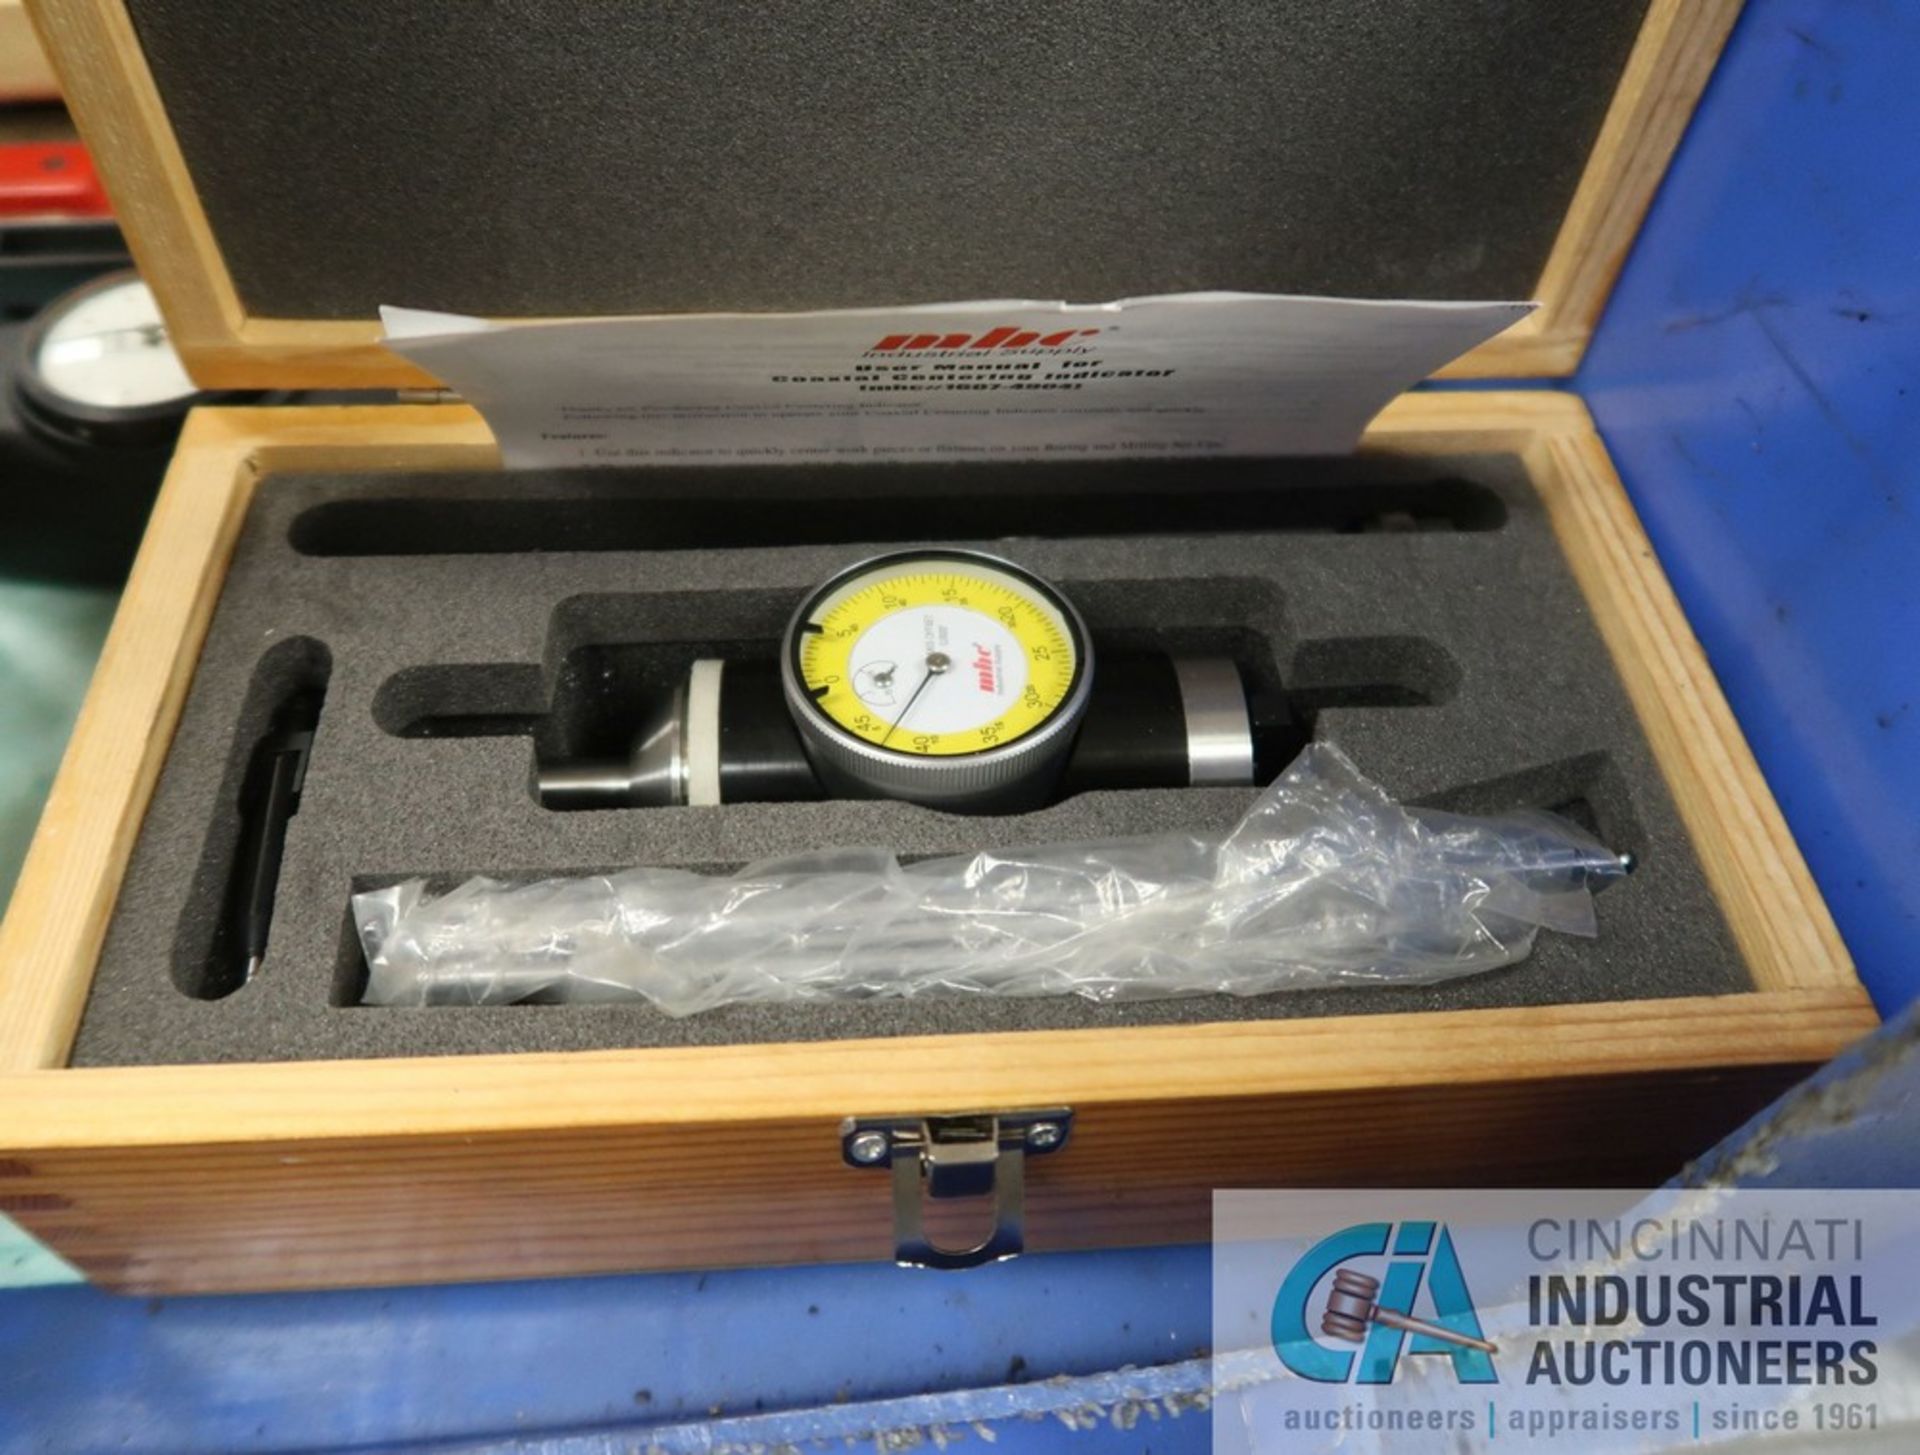 (LOT) MISCELLANEOUS INSPECTION GAGES AND OTHER RELATED ITEMS - Image 5 of 5